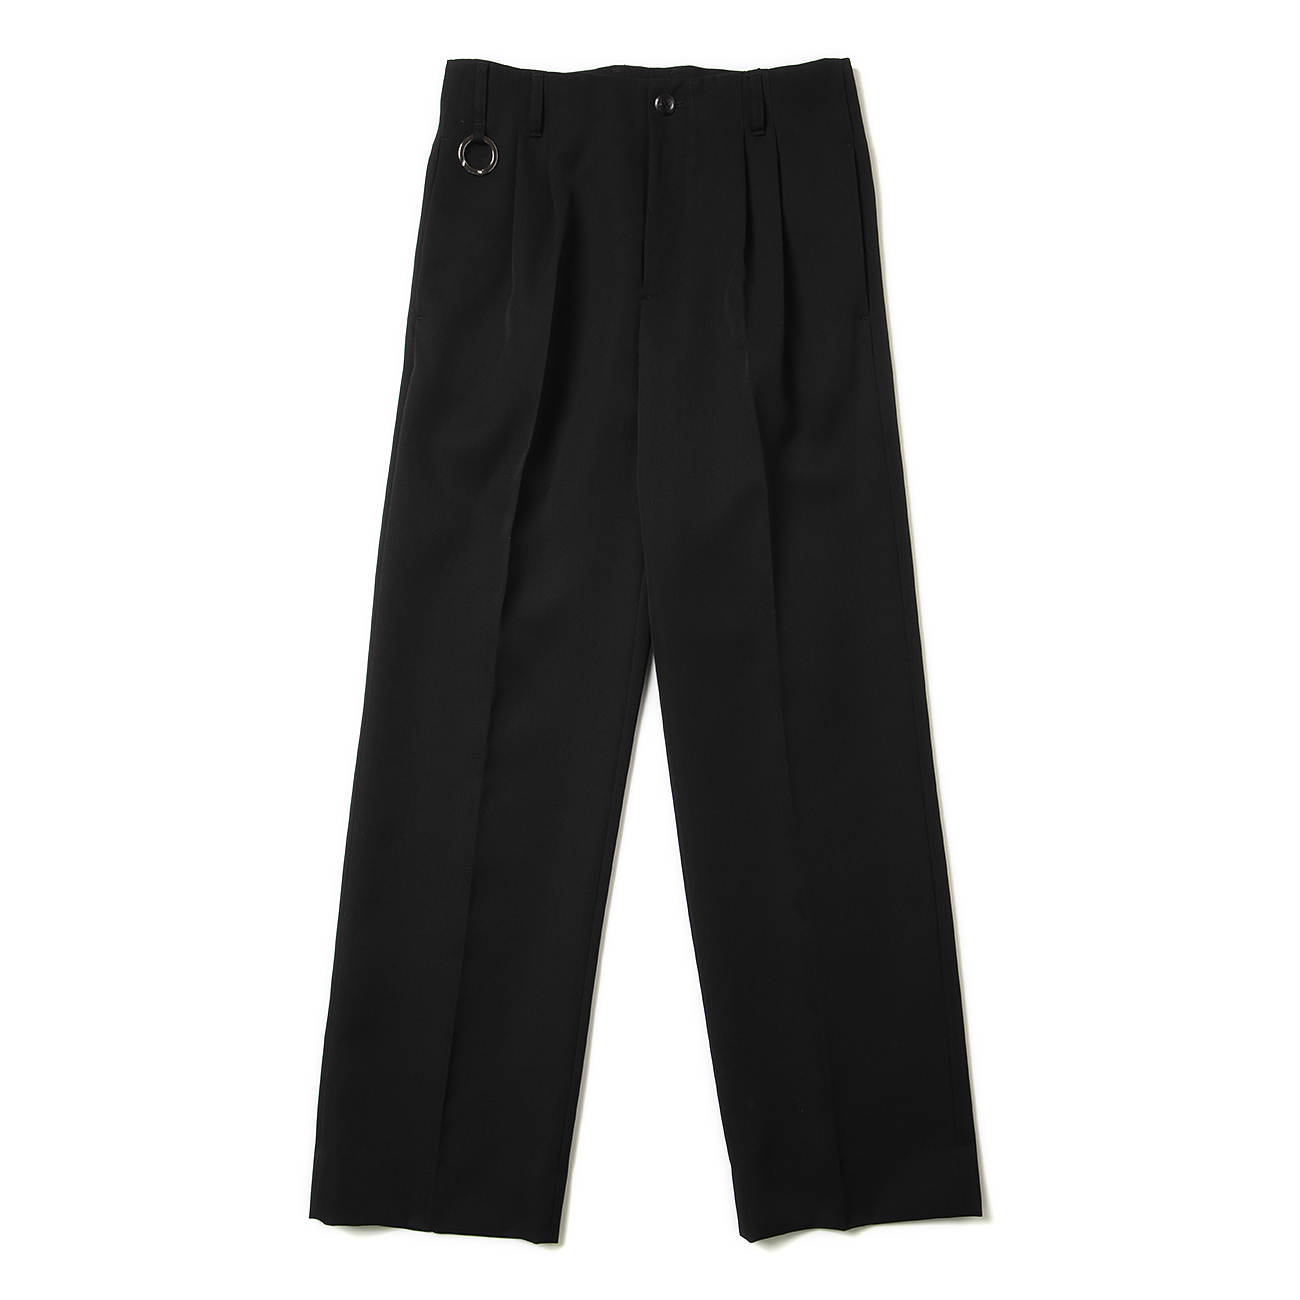 th products QUINN/Wide Tailored Pants